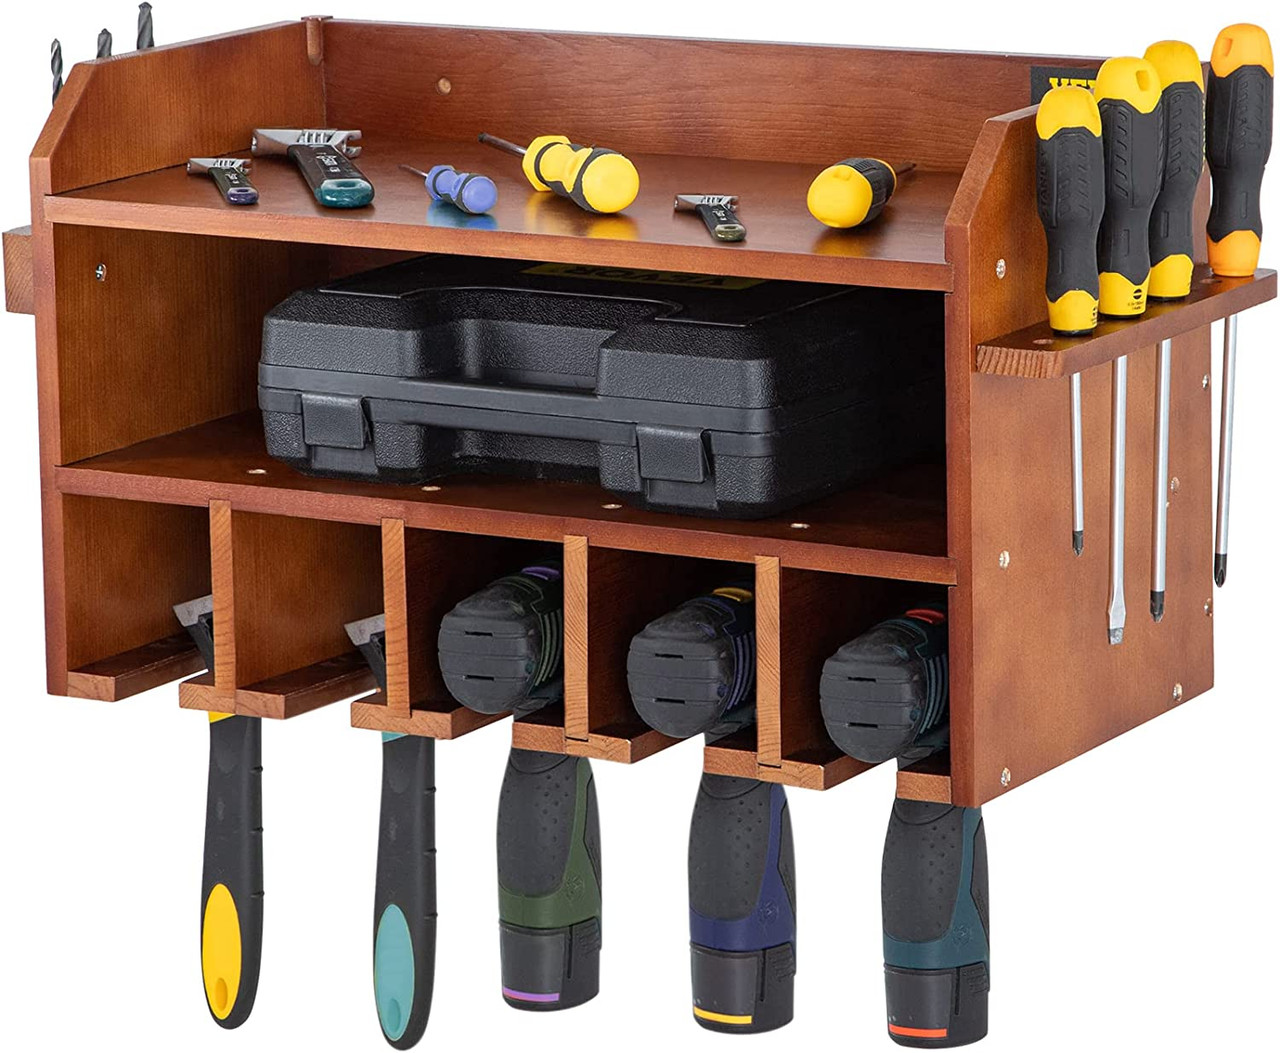 VEVOR Power Tool Organizer, Wall Mount Drill Holder, 5 Drill Hanging Slots Drill Charging Station, 2-Shelf Cordless Drill Storage, Polished Wooden Toolbox for Saw, Impact Wrench, Screwdriver Drill
